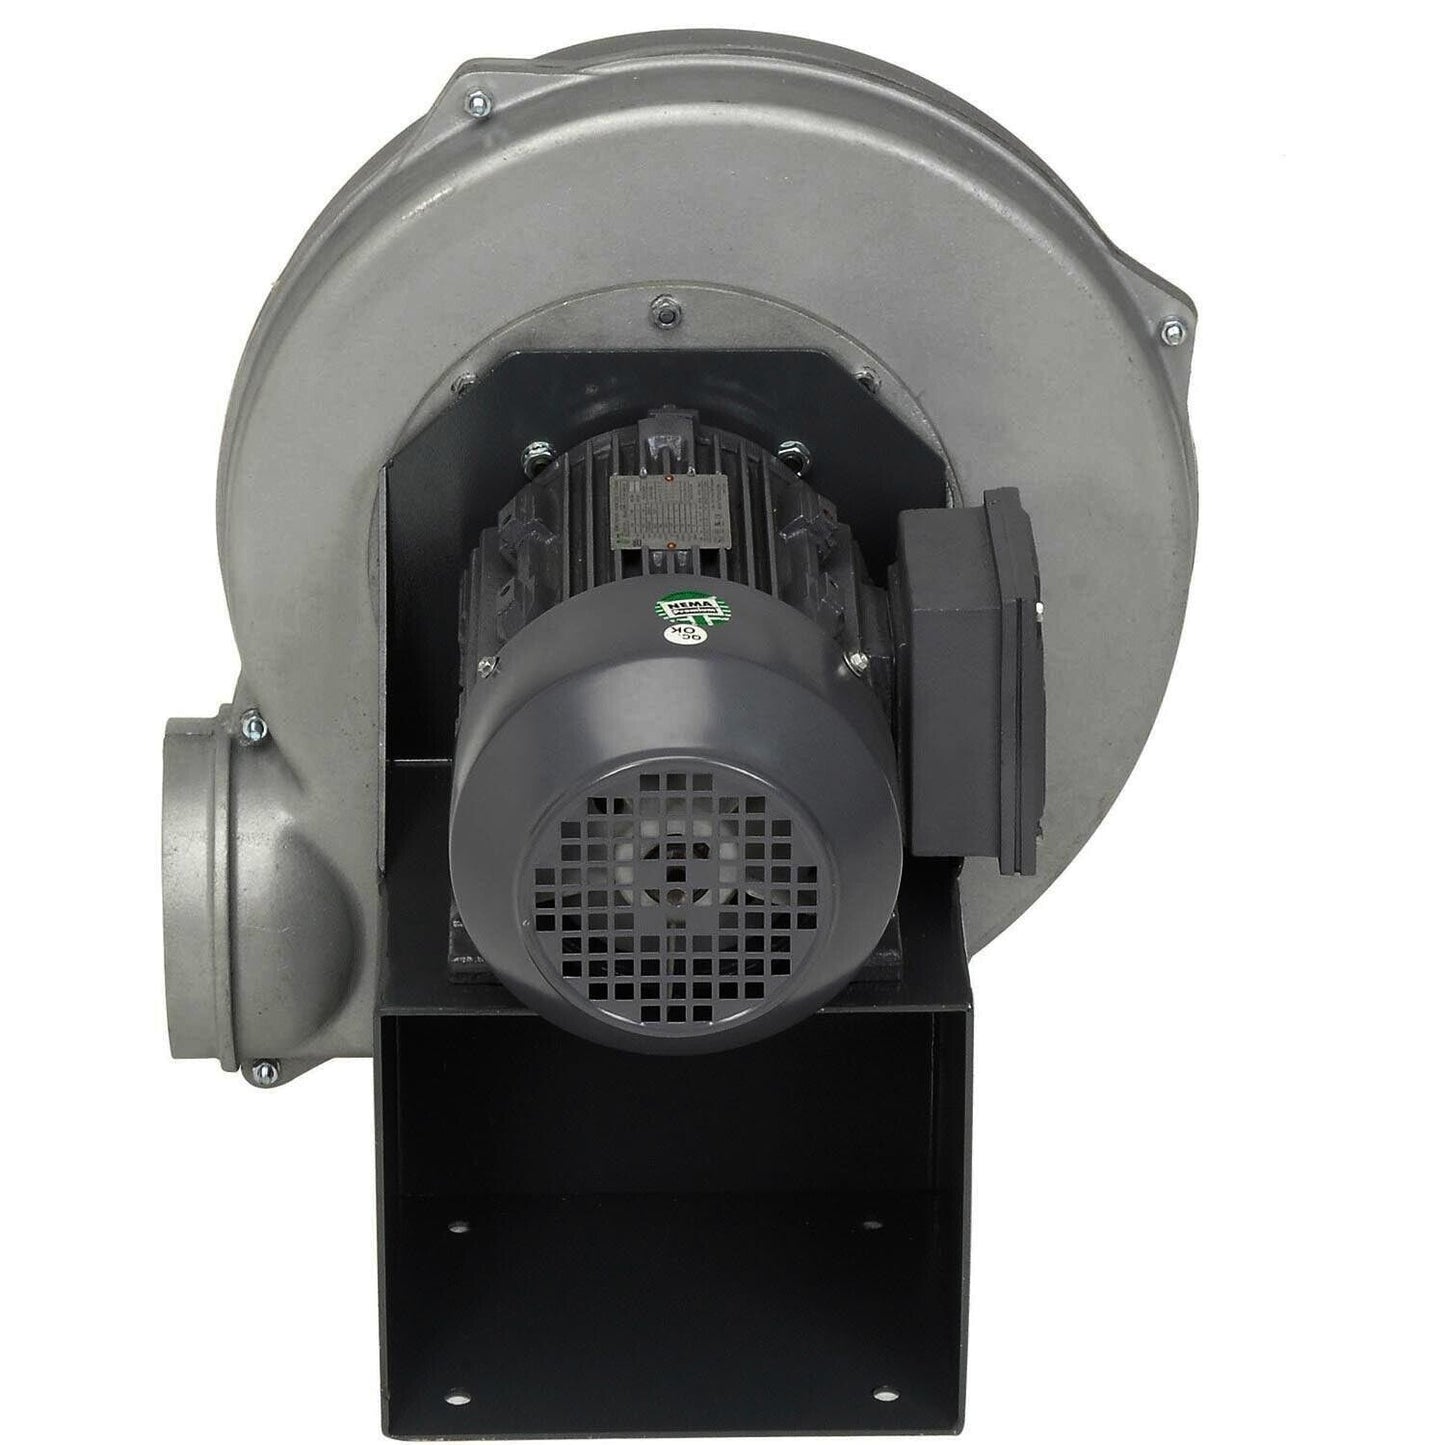 ALUMINUM BLOWER - 571 CFM - 230/460V - 3PH - 3/4 Hp - 6" In / 5" Out - TEFC - BH